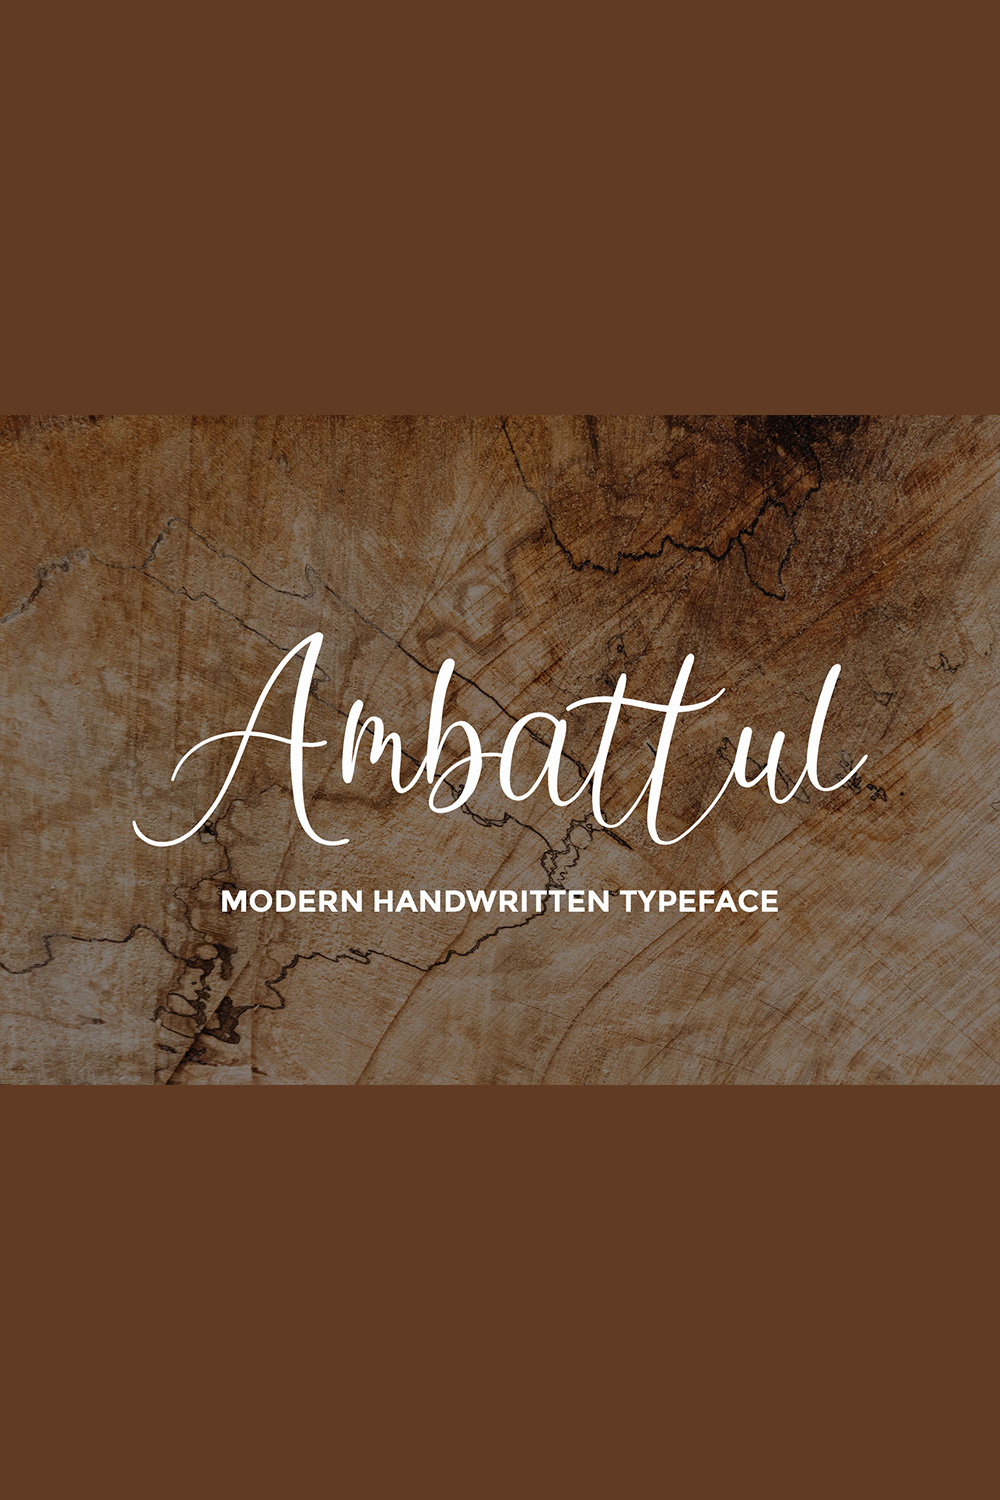 An image with text showing the unique Ambattul font